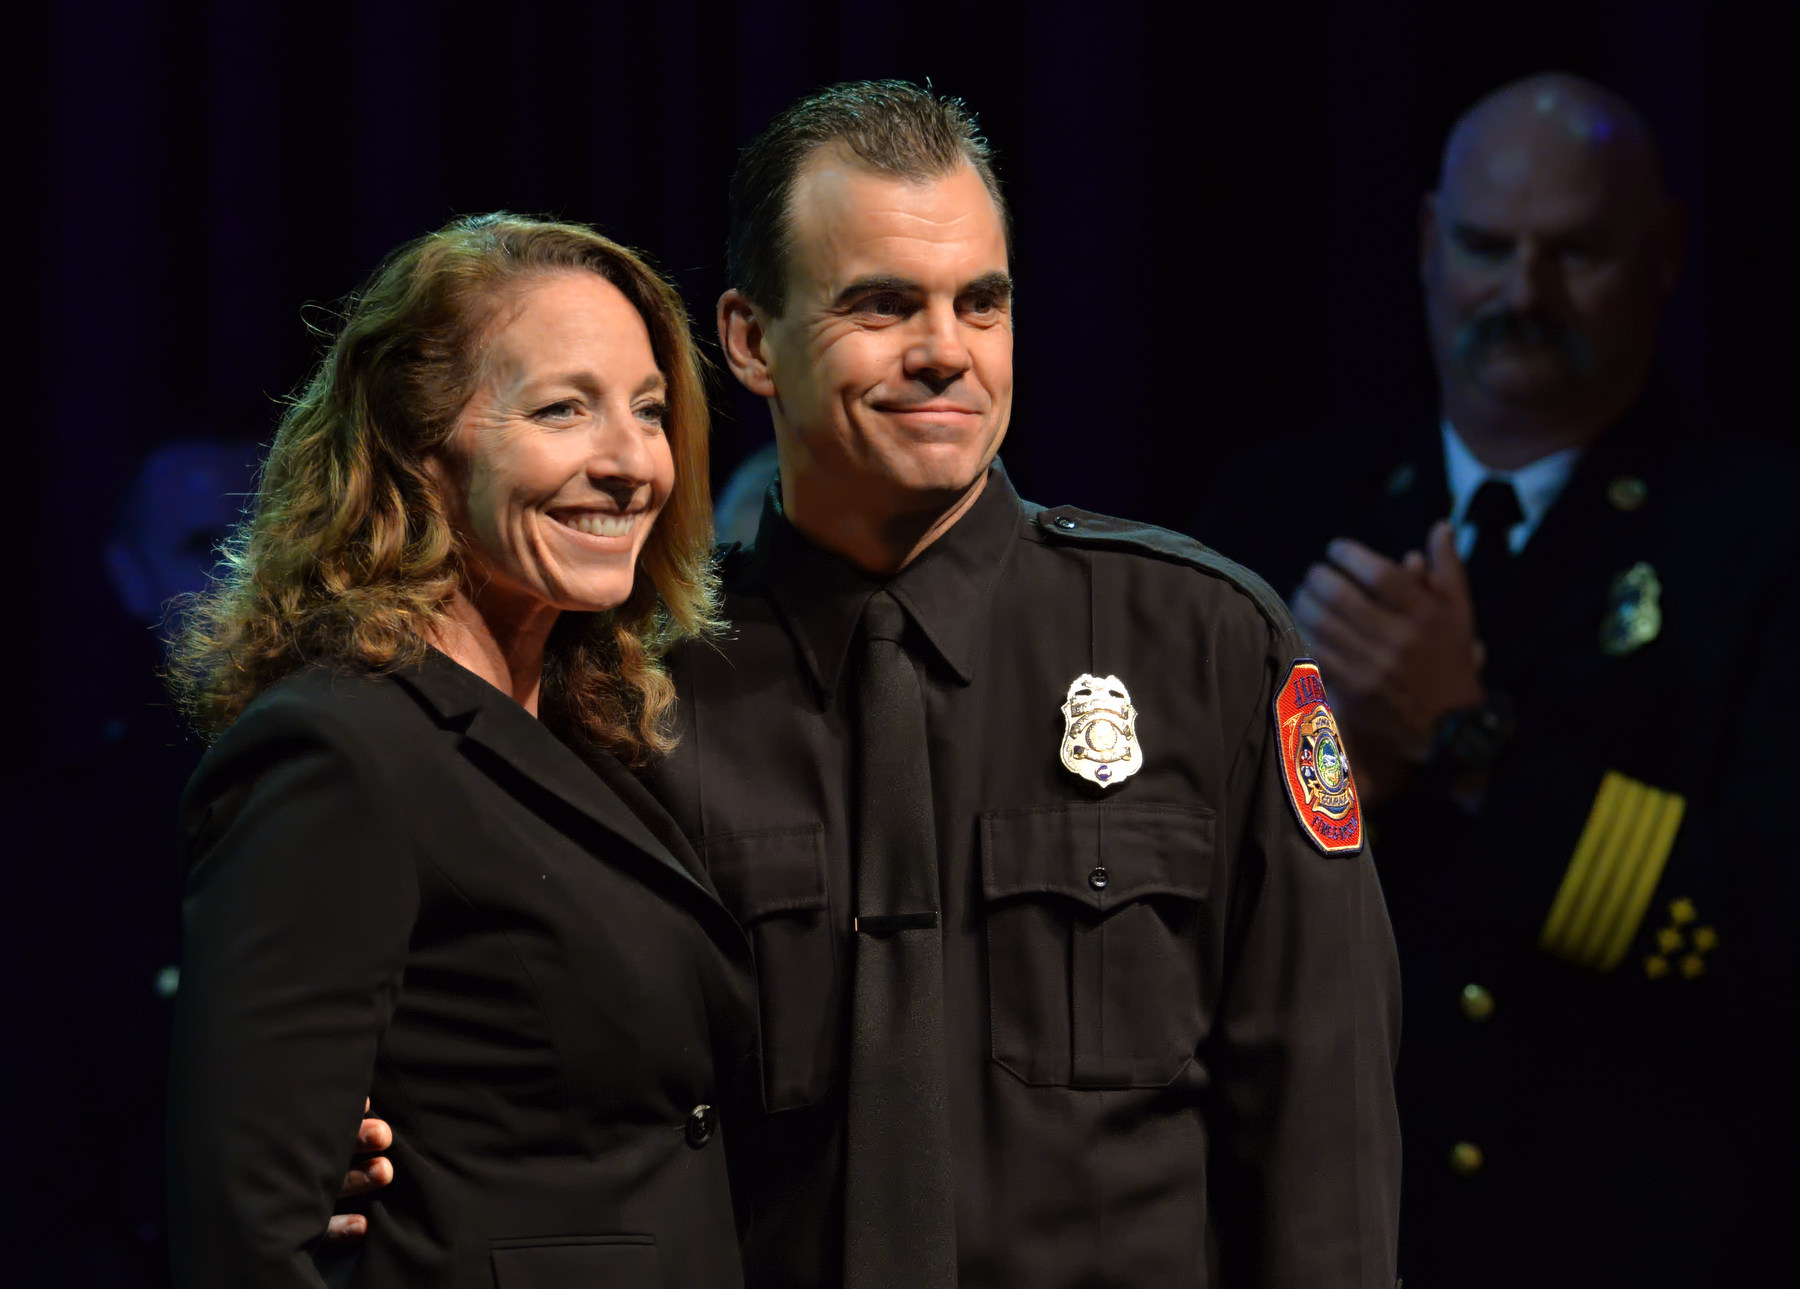 Fire Engineer Shane Kohls with his wife Annette Kohls during the Anaheim Fire & Rescue Promotion and Graduation ceremony. Photo by Steven Georges/Behind the Badge OC